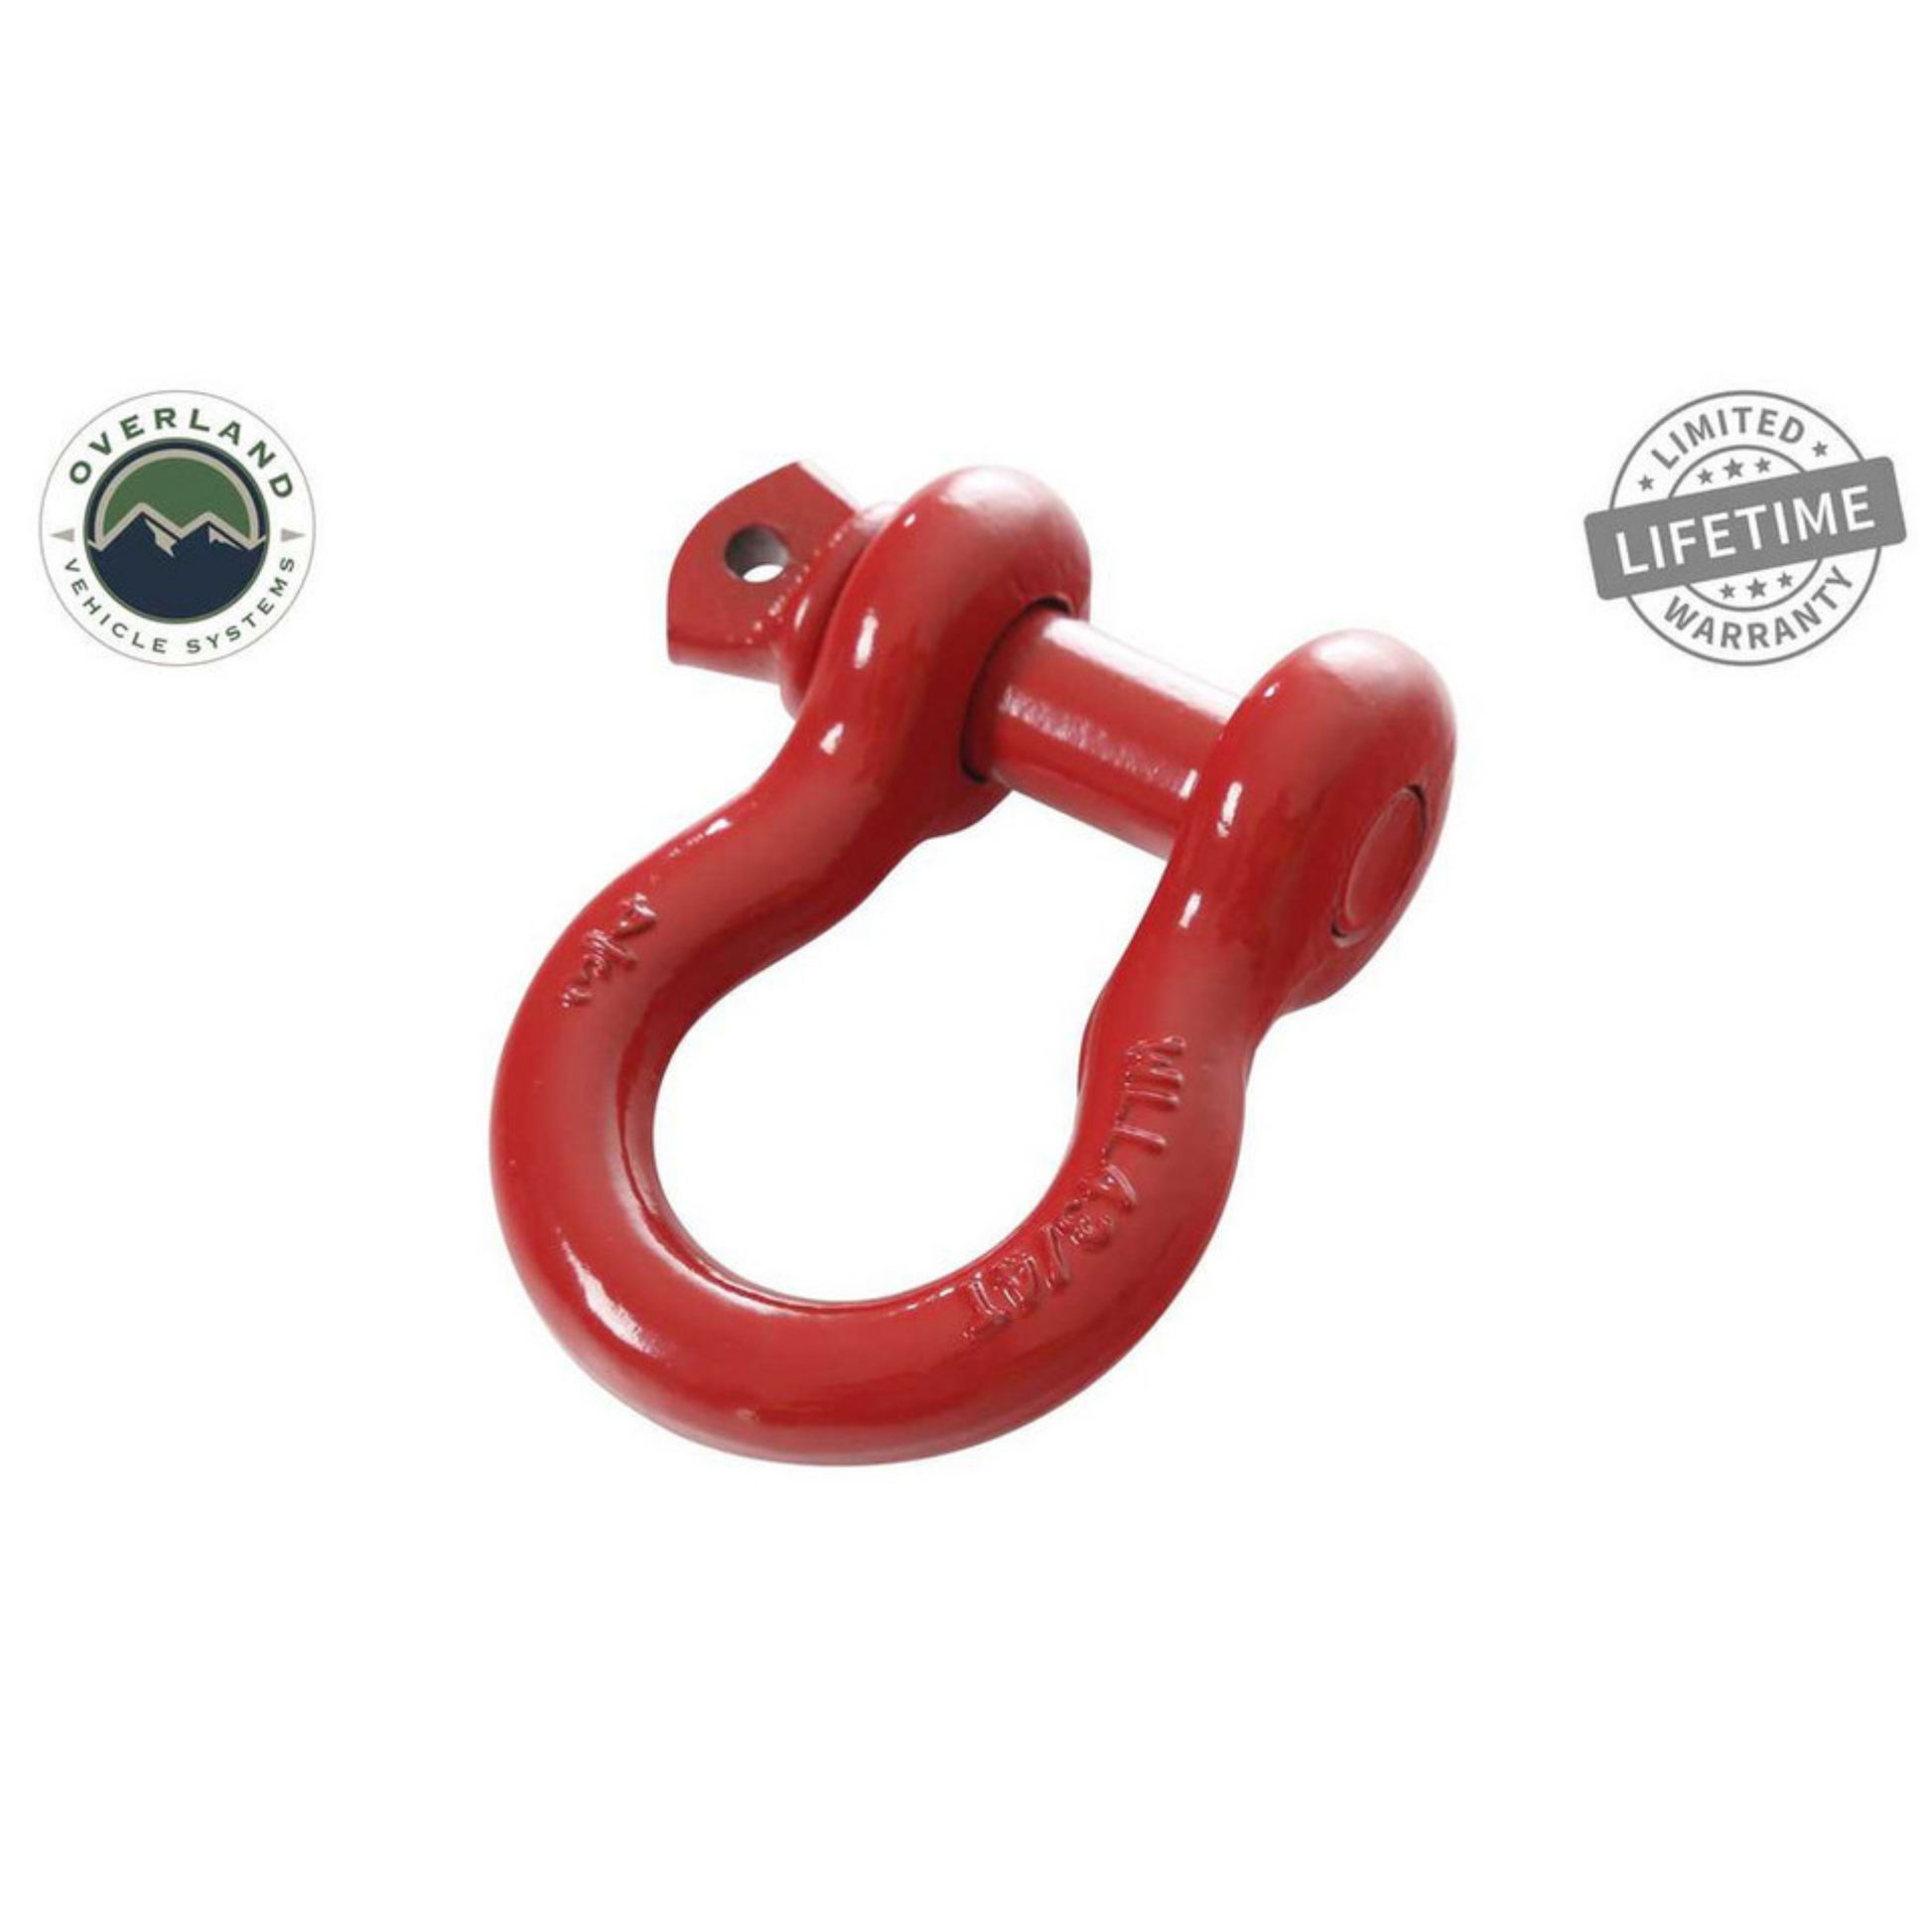 Heavy Duty 3/4" D-Ring Recovery Shackle - Red Single D RIng